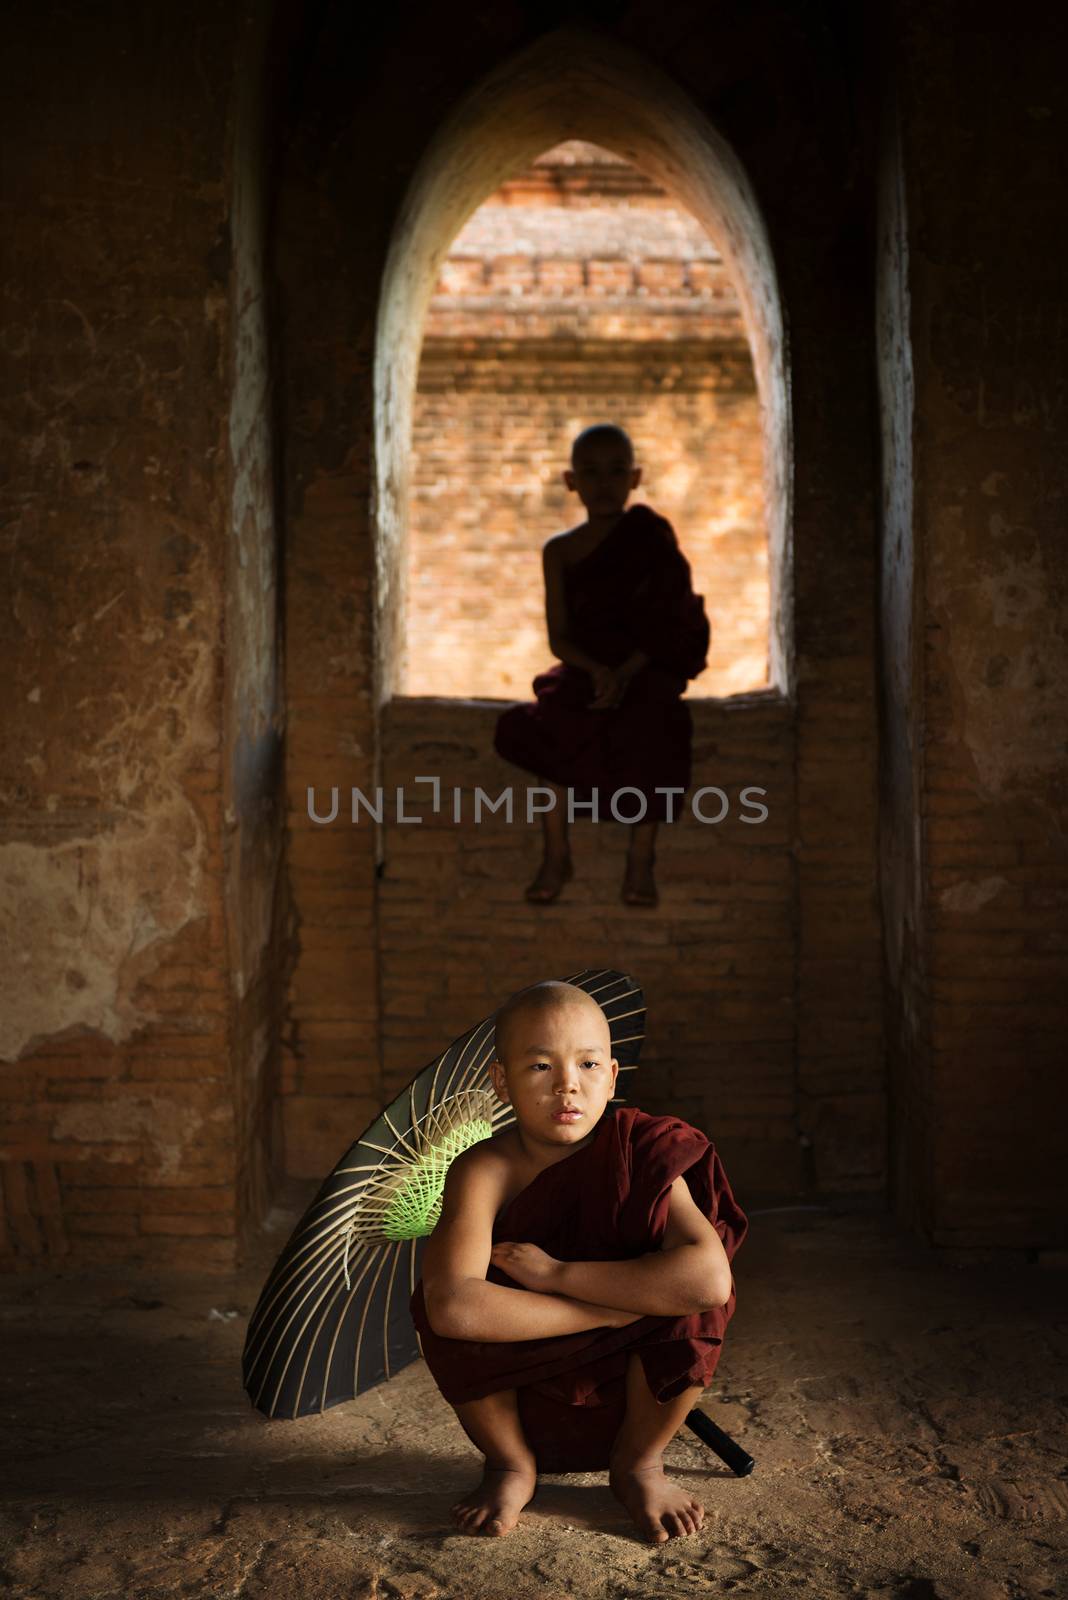 Portrait of young novice monks inside ancient Buddhist temple, Bagan, Myanmar.